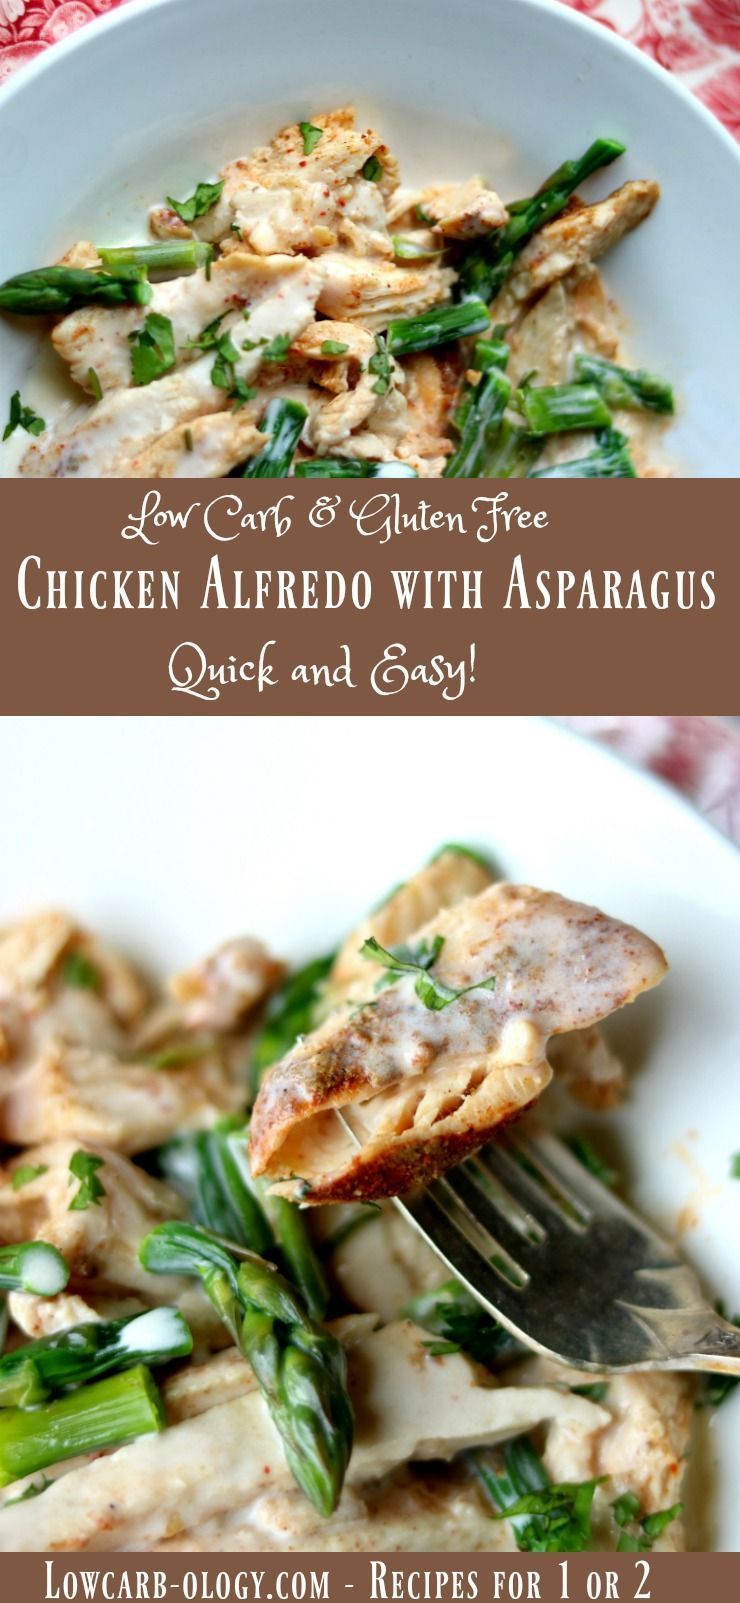 Quick and easy, low carb chicken Alfredo recipe is gluten free and has just 4.6 net carbs. Pure comfort food right here! Rich and